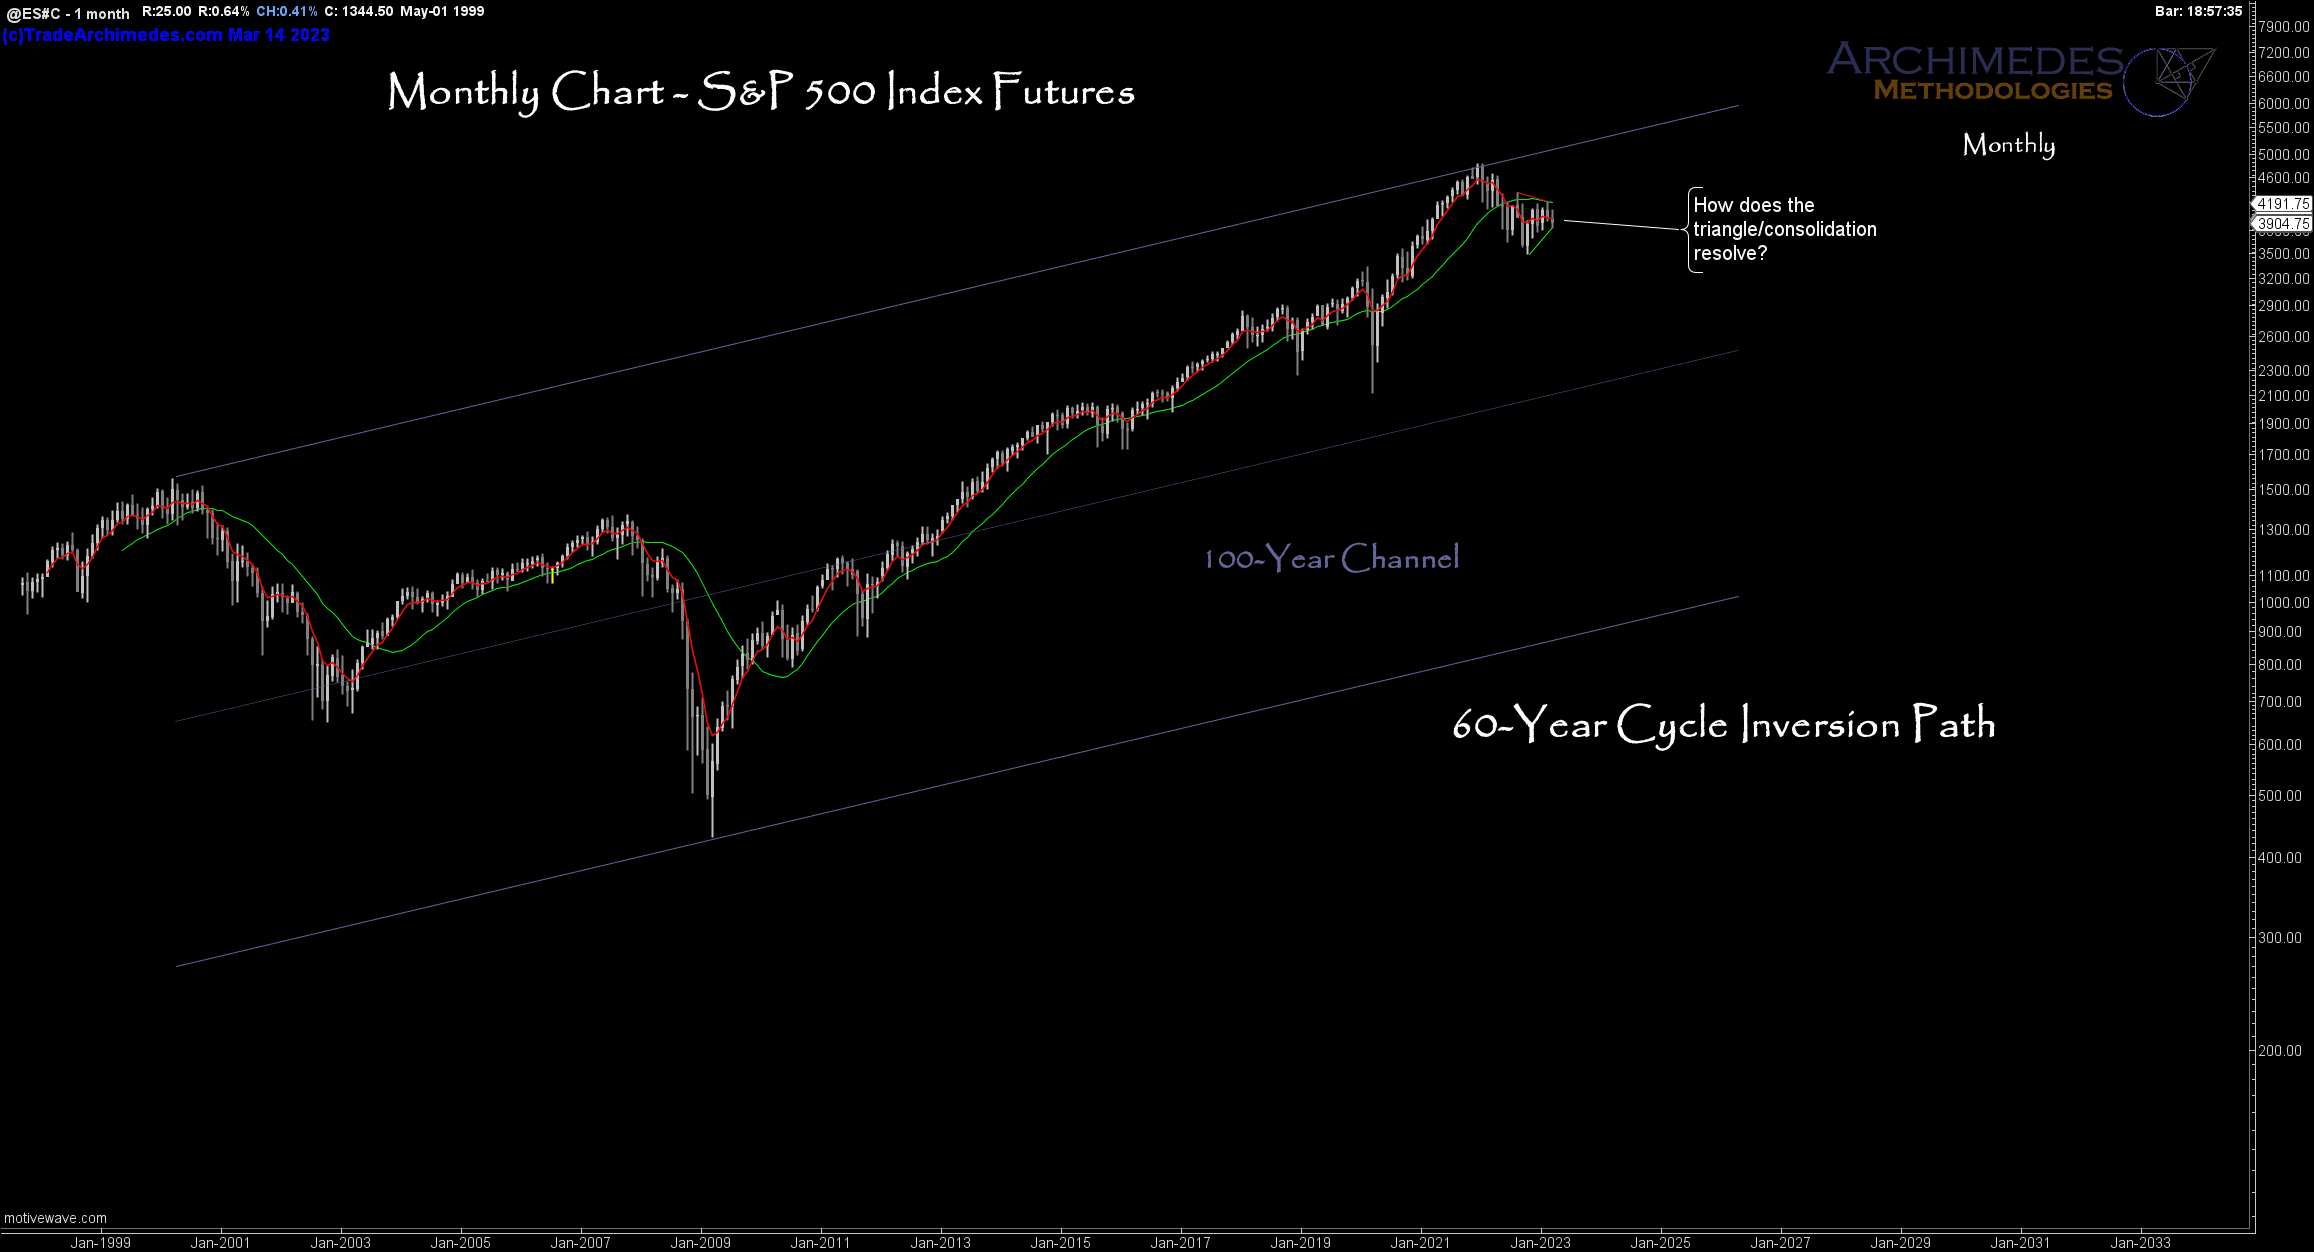 S&P 500 Index Futures - Monthly Chart of Triangle Consolidation from August 2022 to Date (click to enlarge).